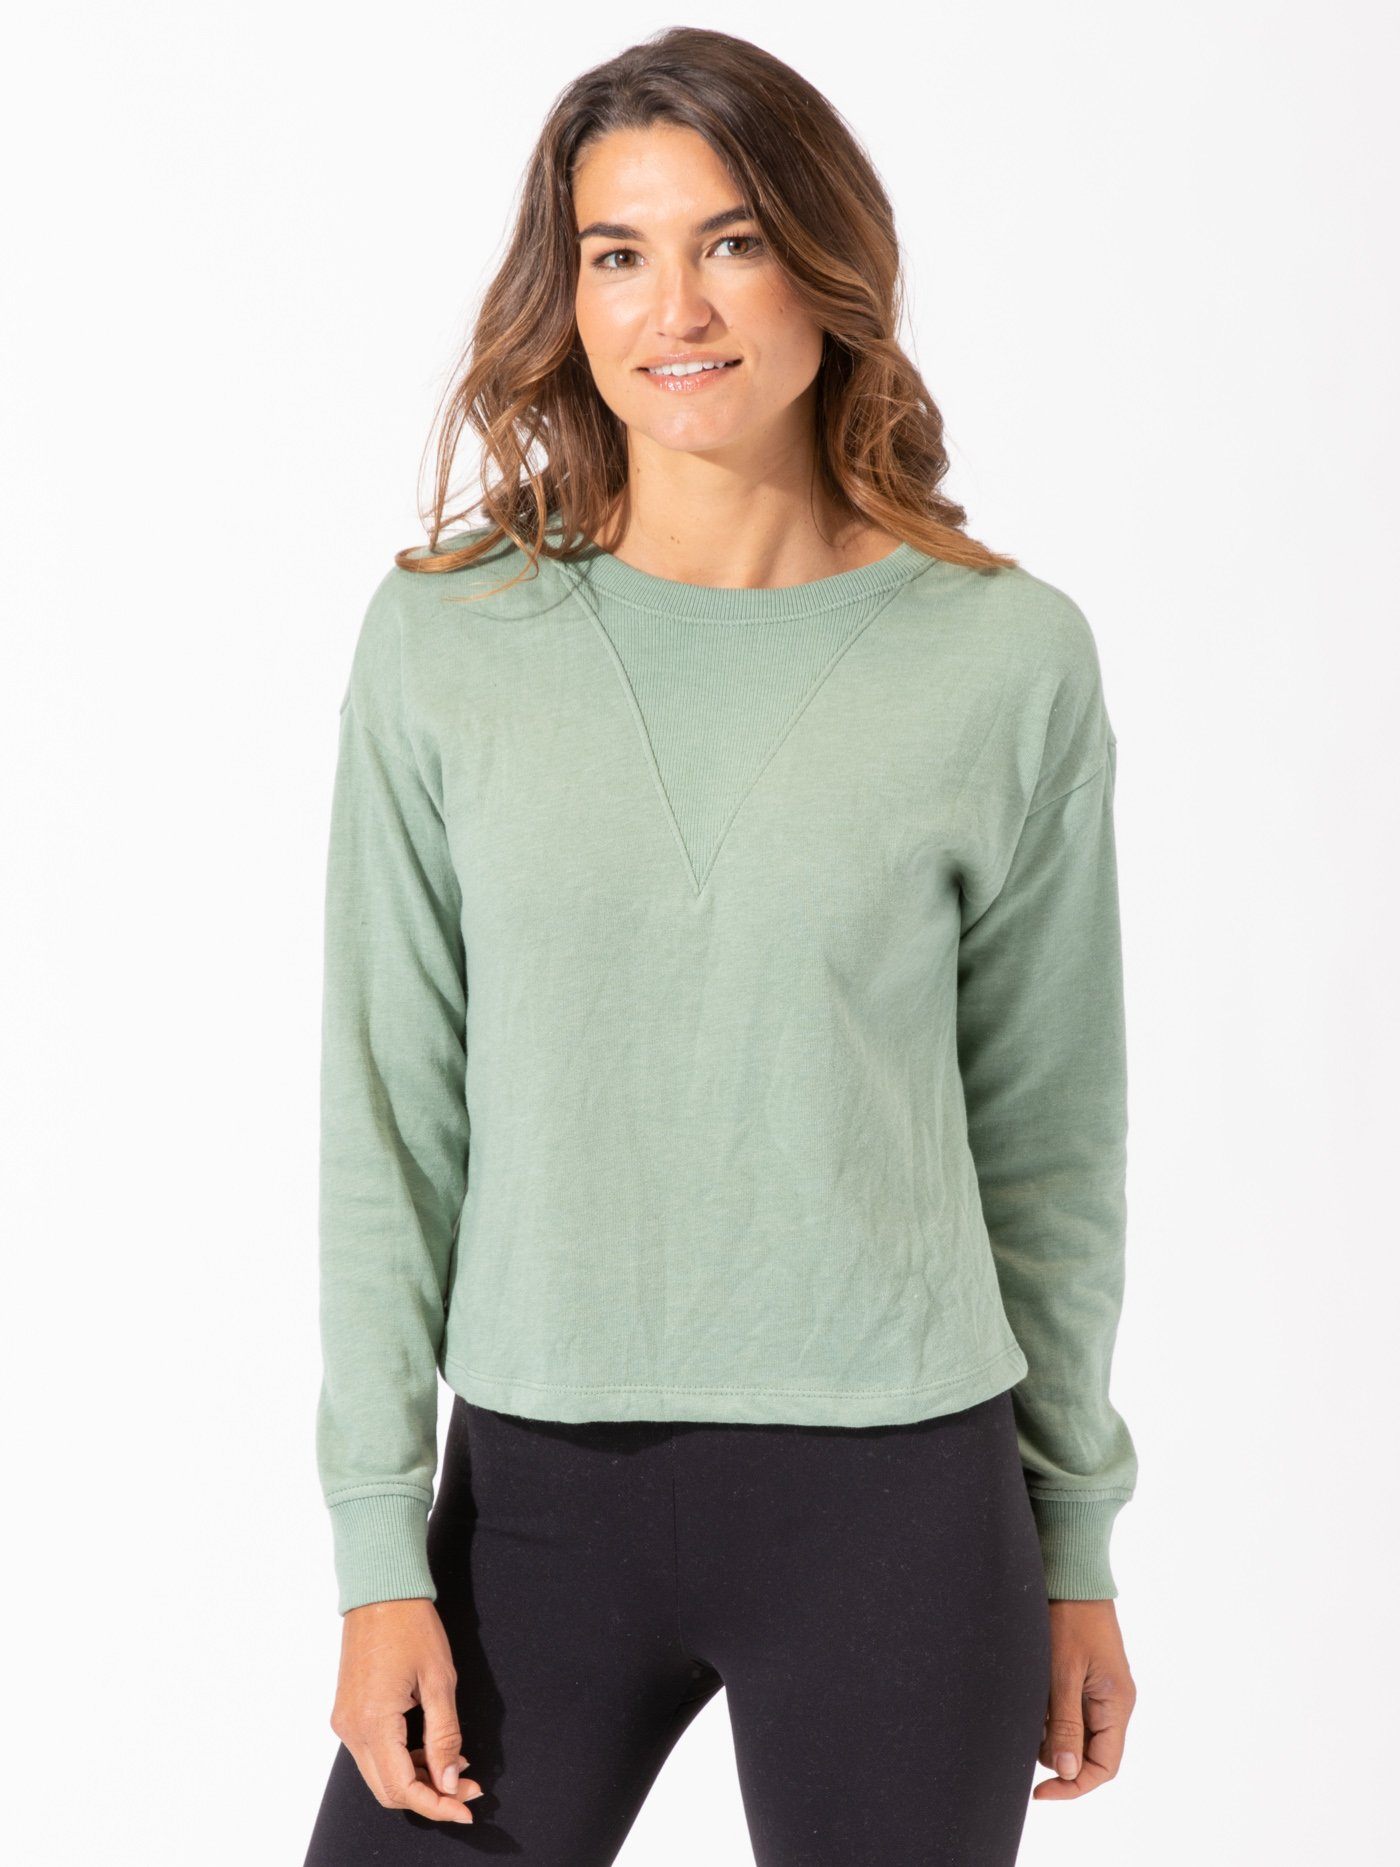 Darby Panel Pullover Threads 4 Thought 